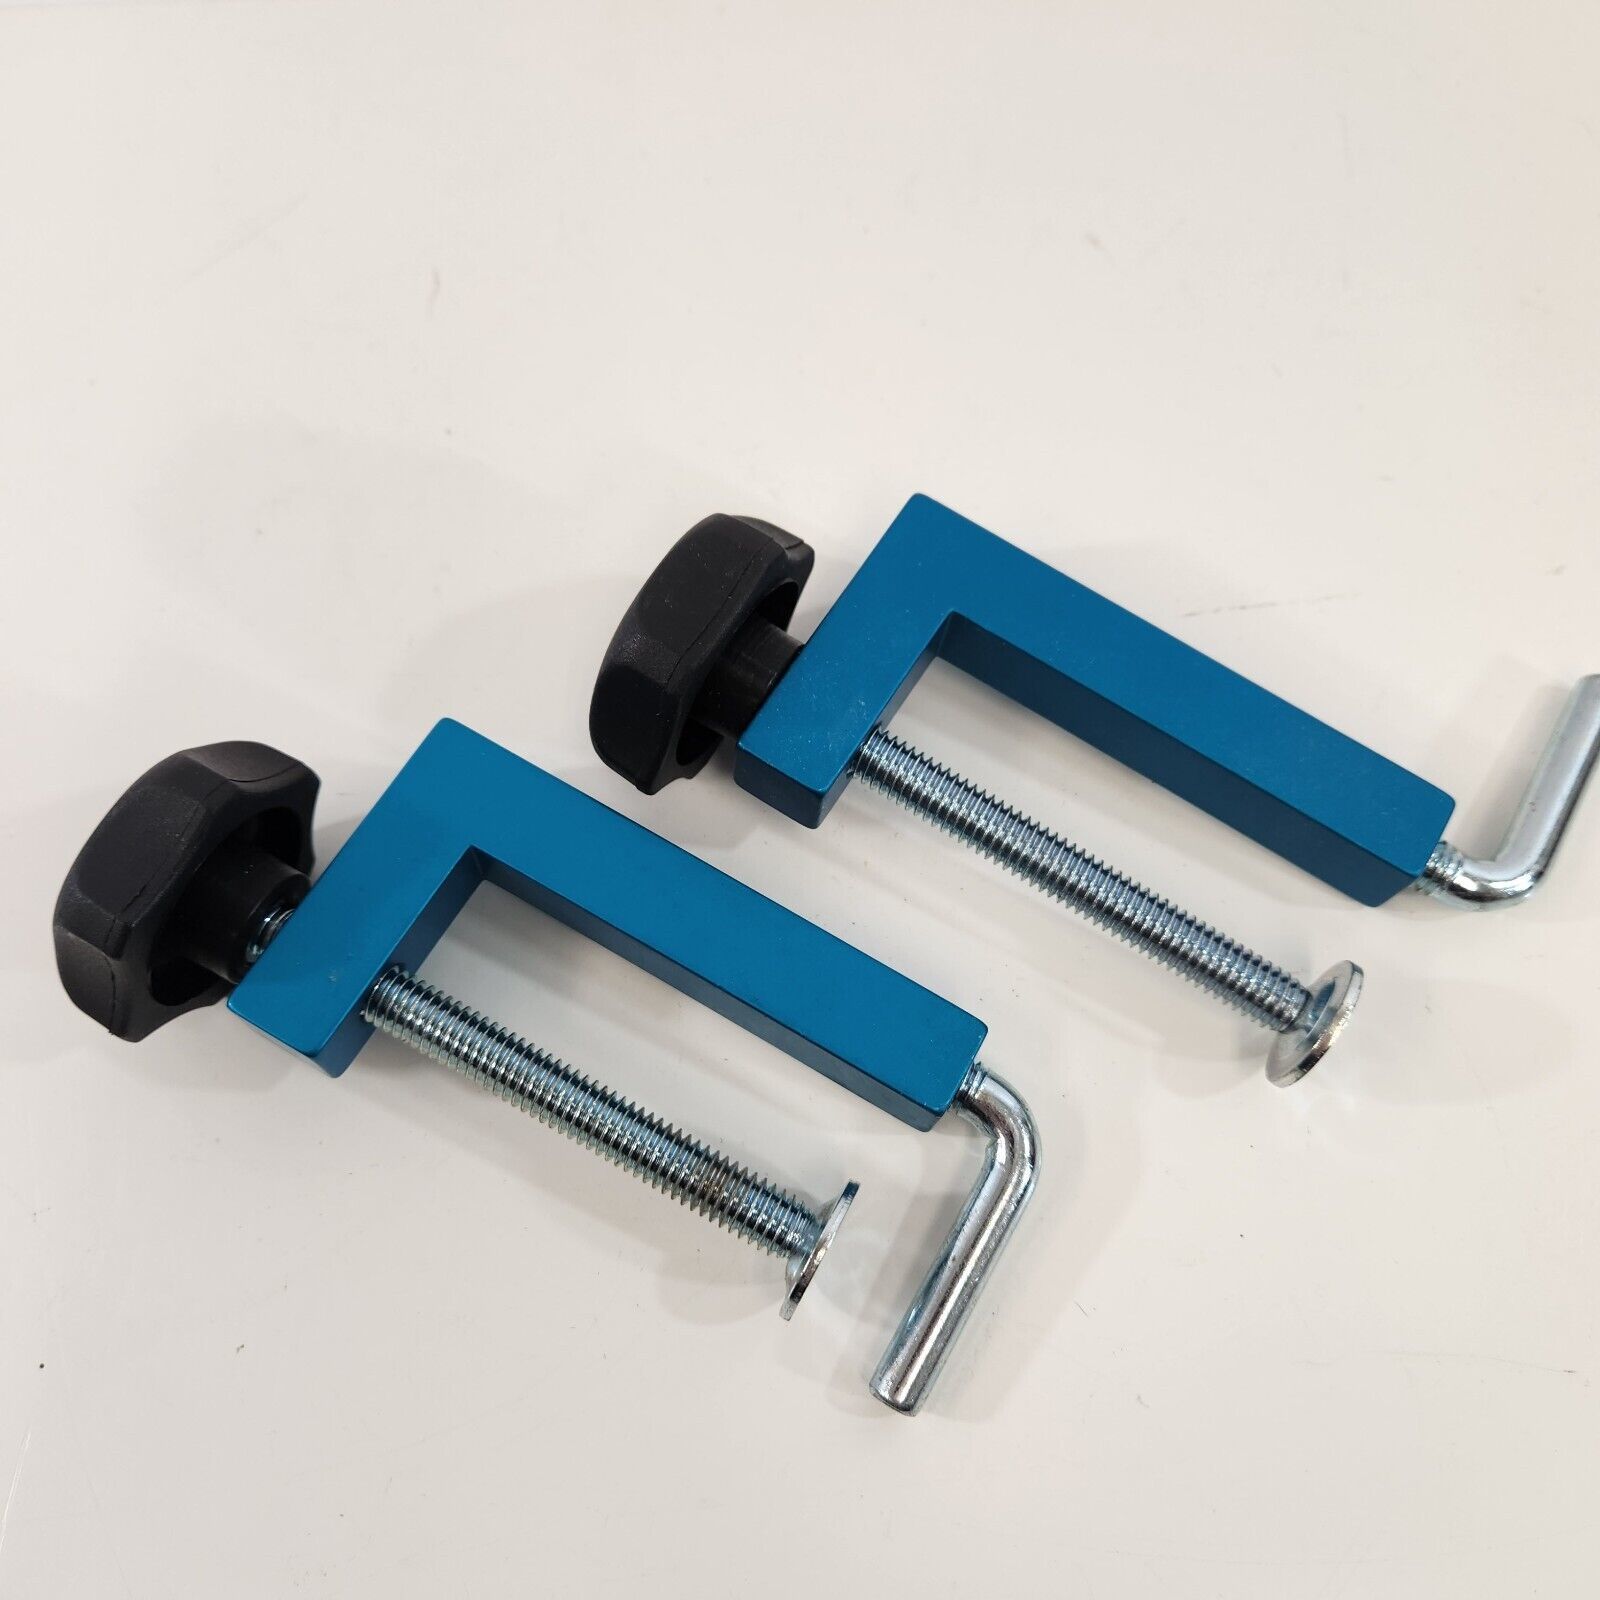 Rockler Universal Fence Clamps Set of 2 Woodworking Tools Standard - $24.18